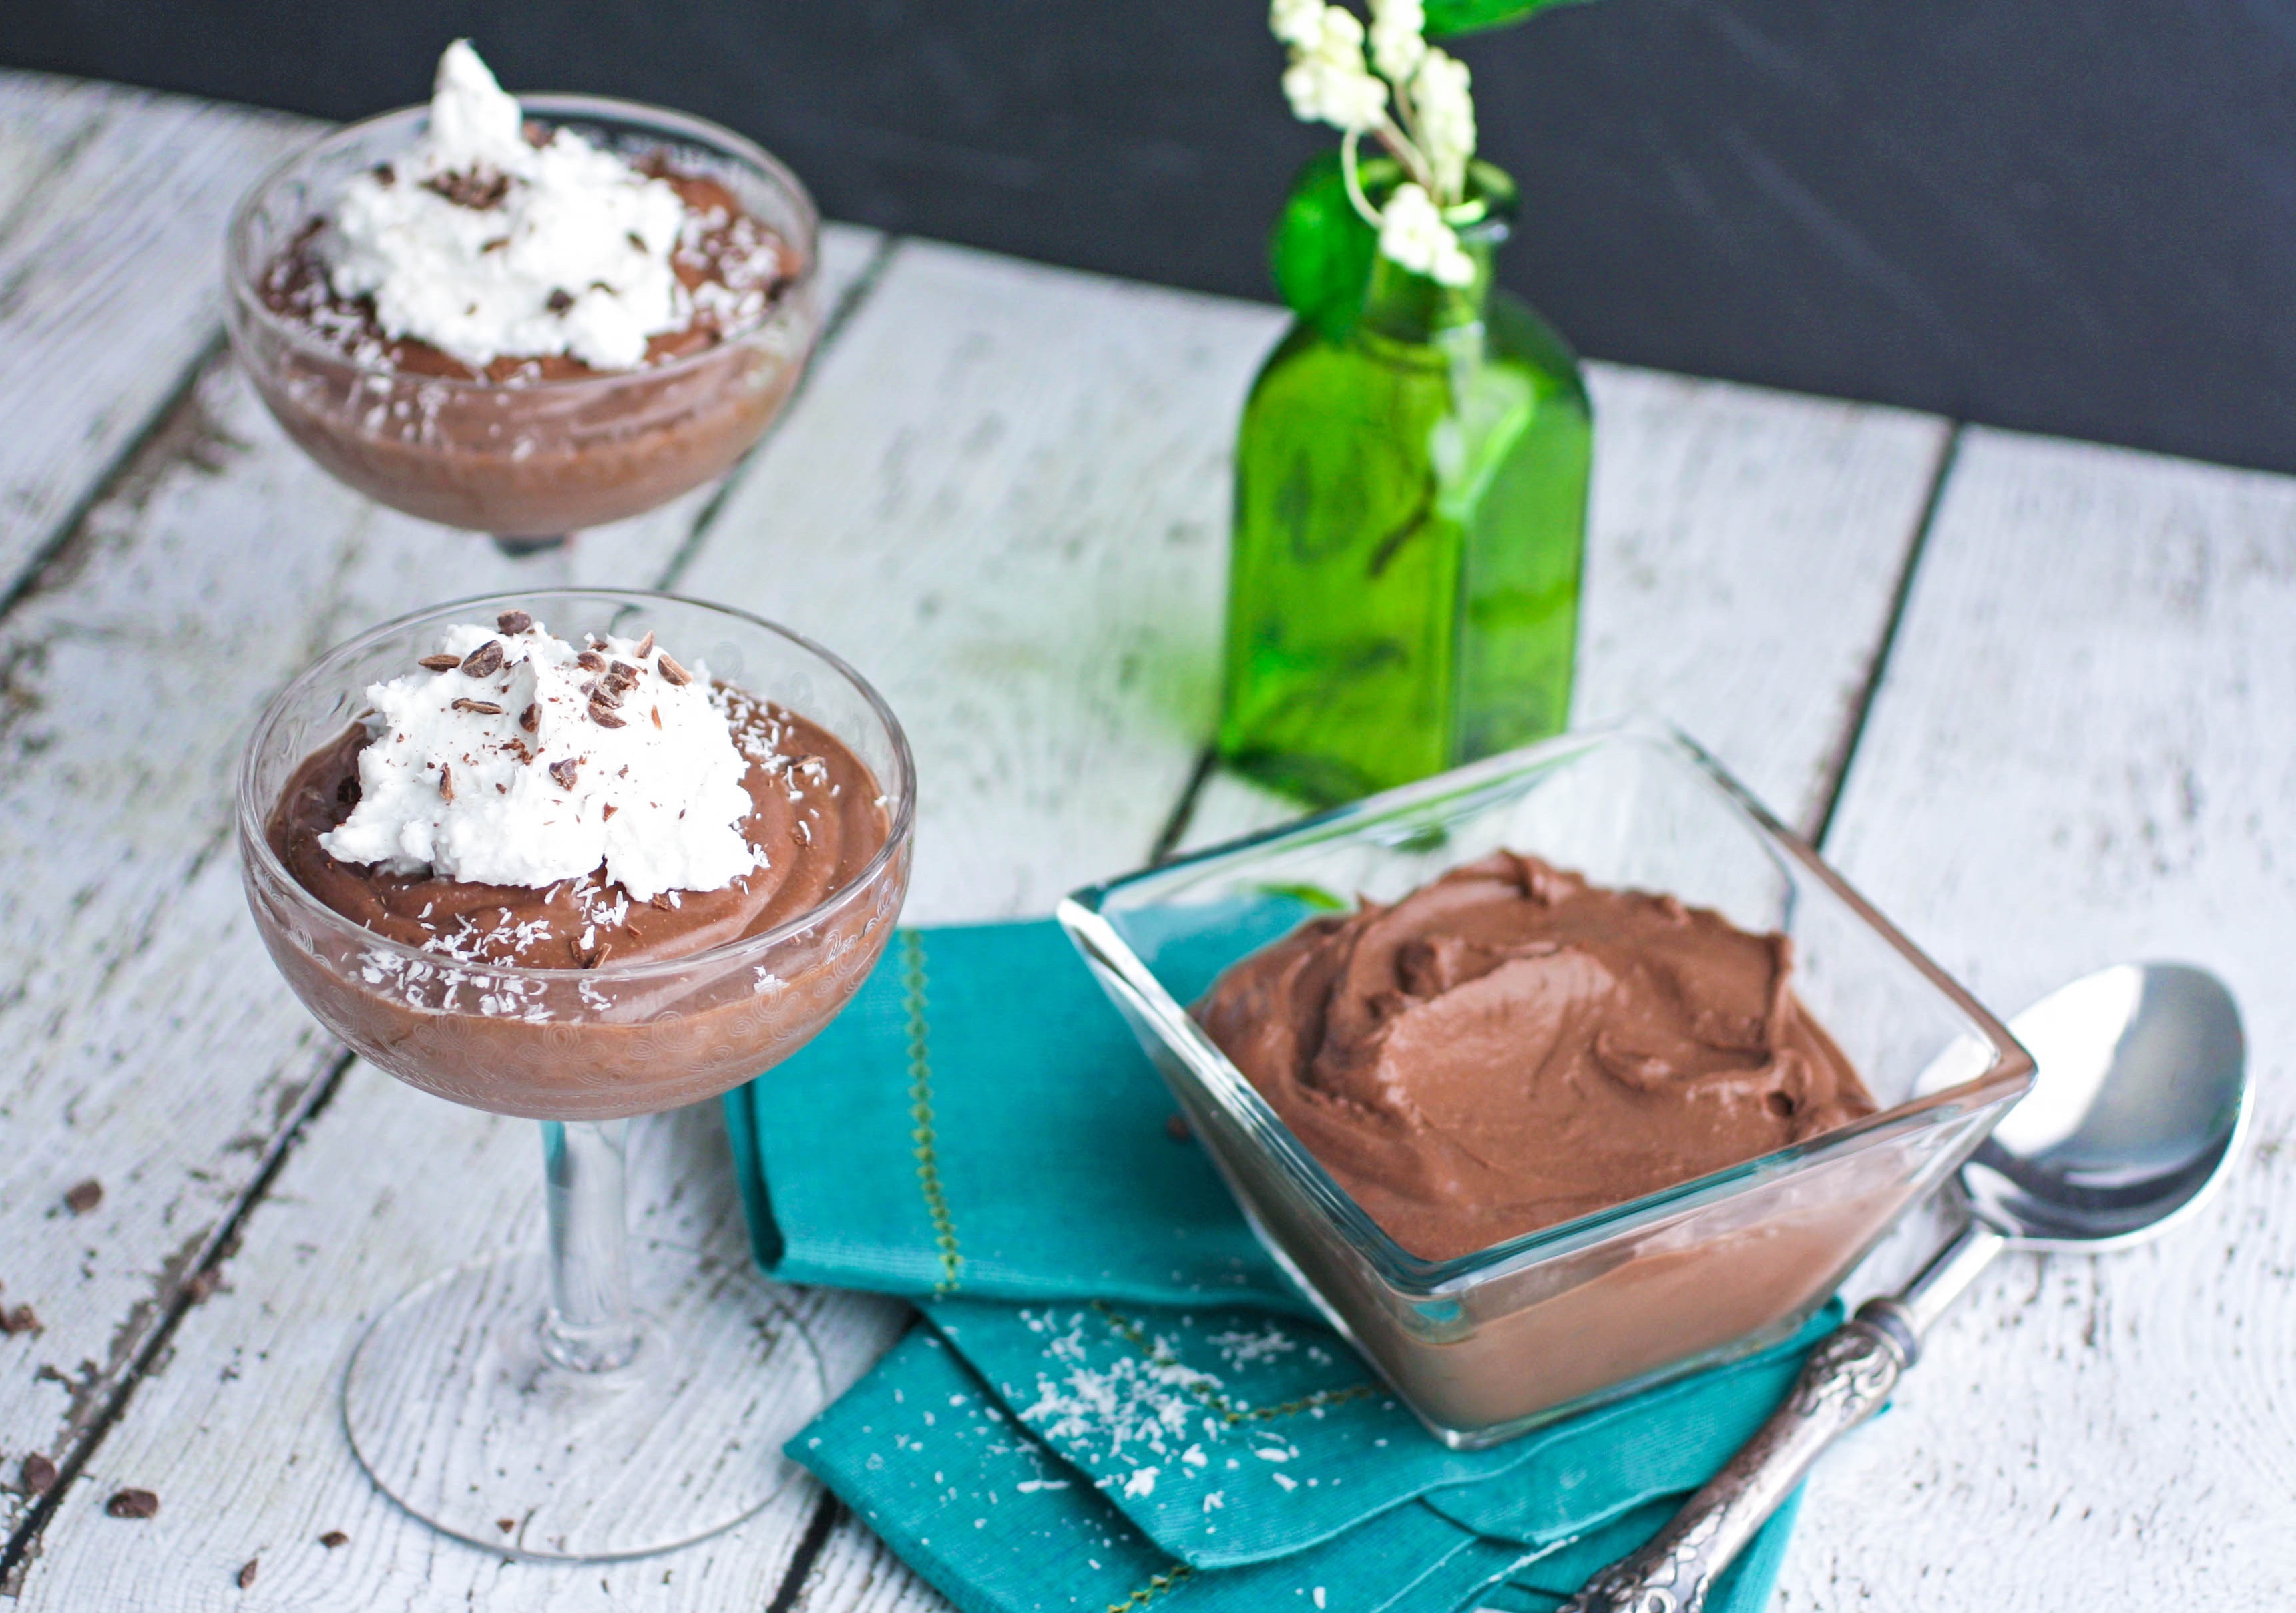 Vegan Chocolate-Almond Mousse with Coconut Whipped Topping is a dessert that is super dreamy. You'll love this vegan chocolate mousse!